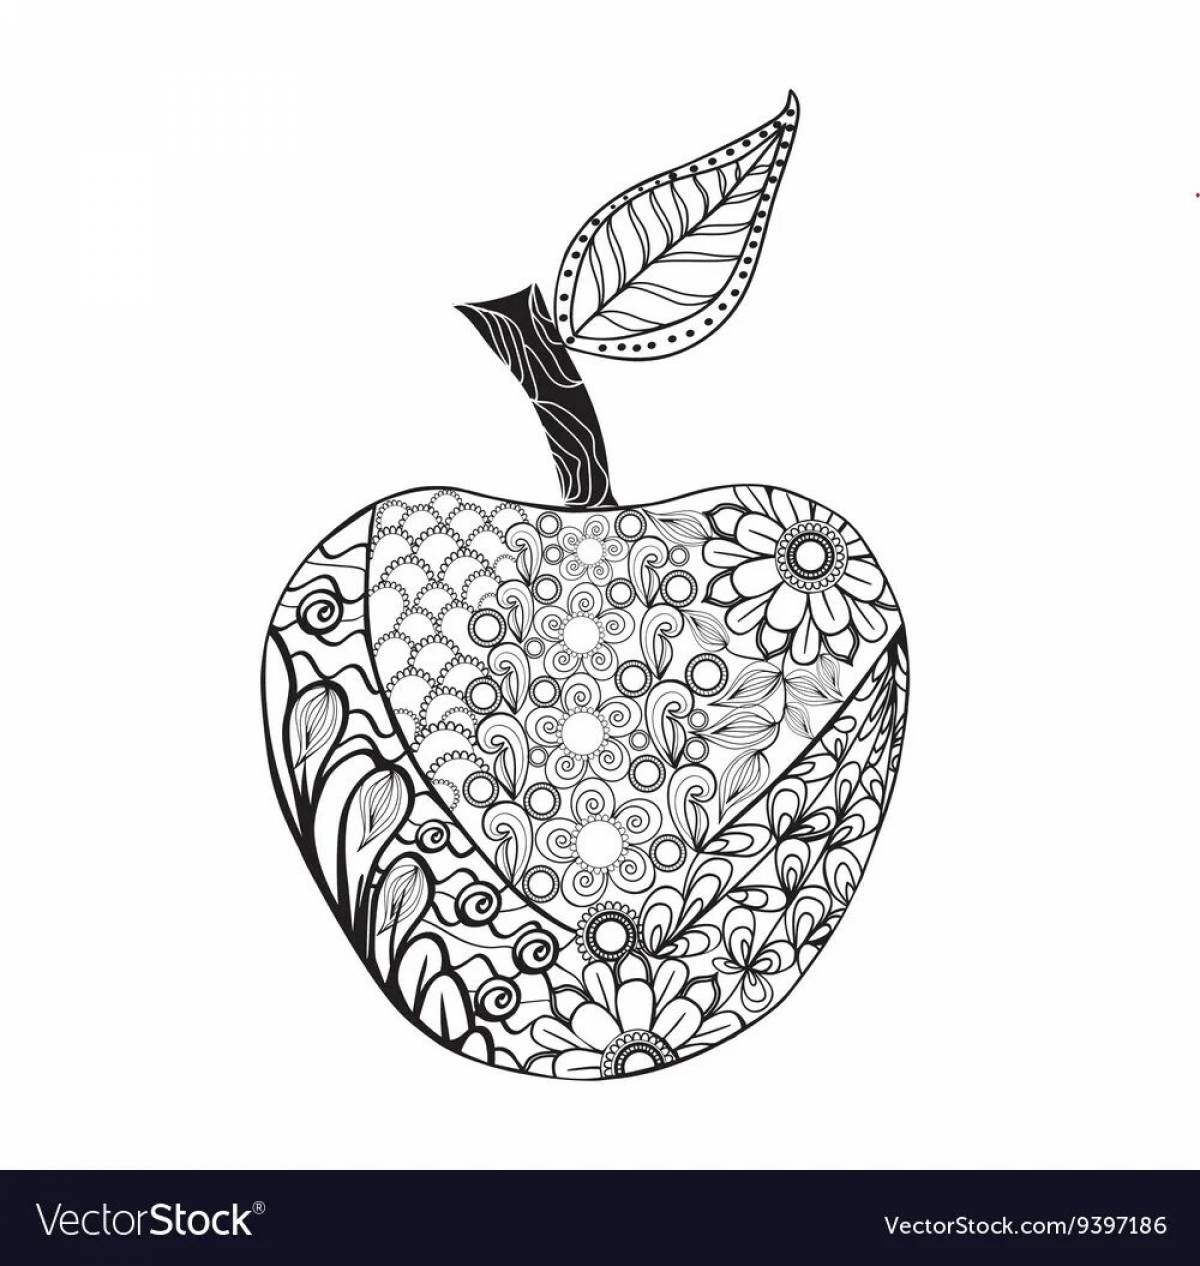 Absorbing anti-stress coloring book apple